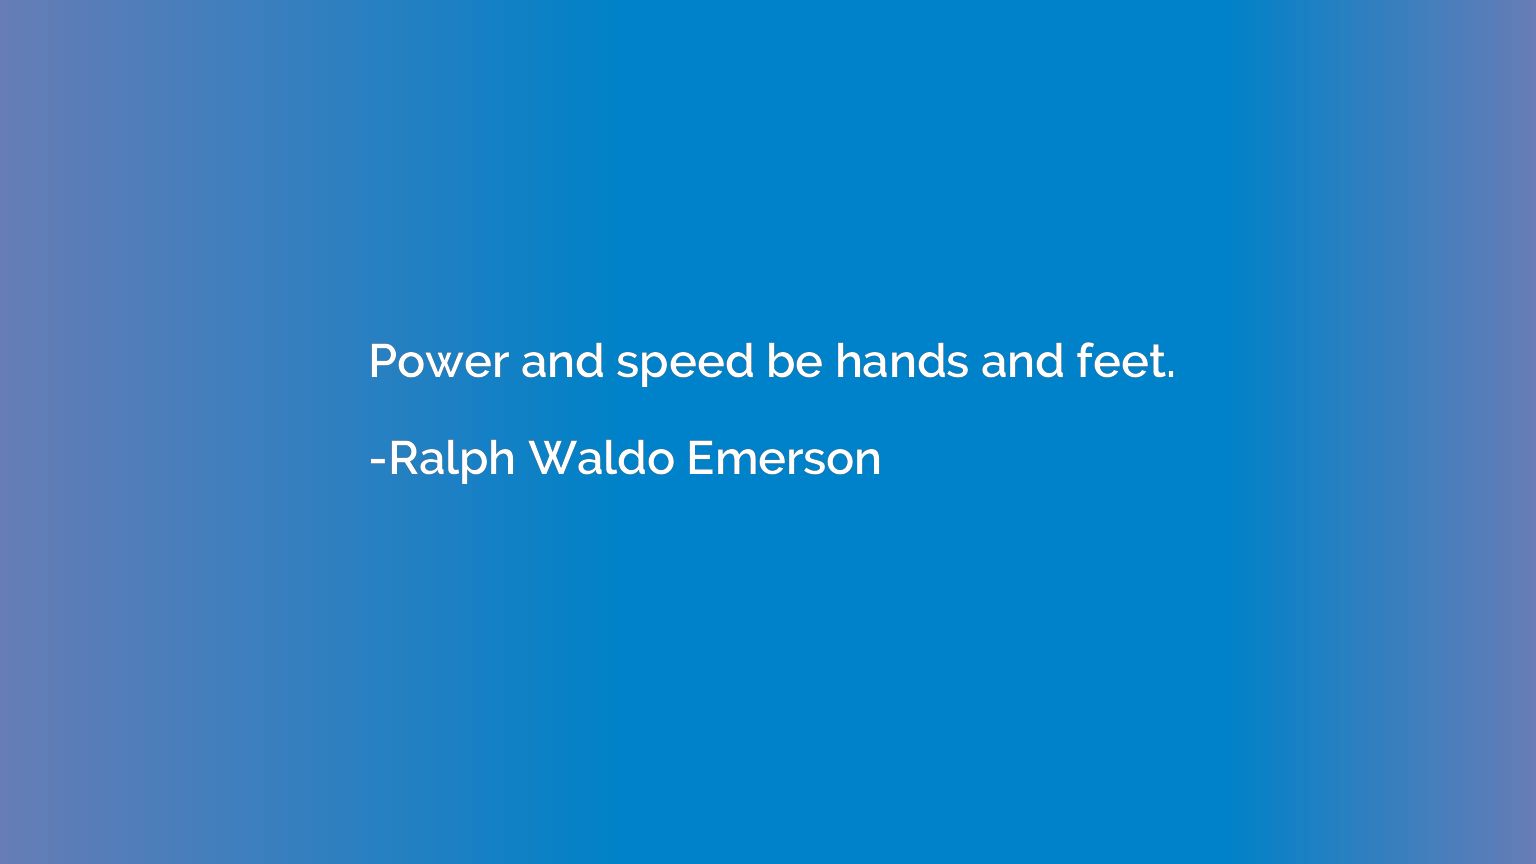 Power and speed be hands and feet.